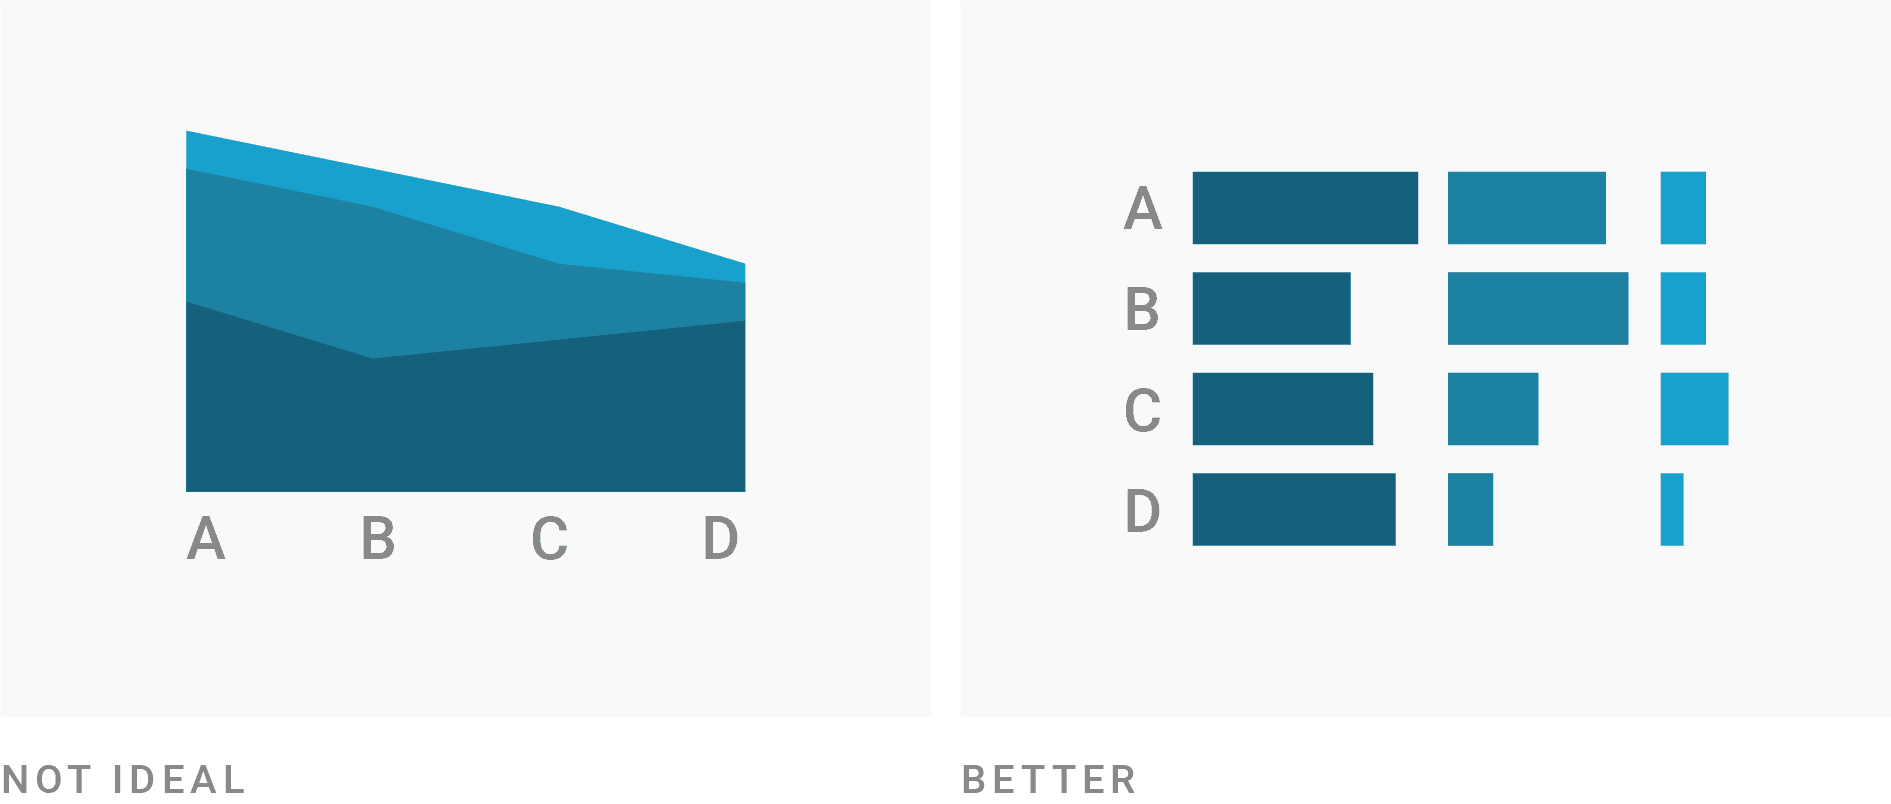 What to consider when creating area charts